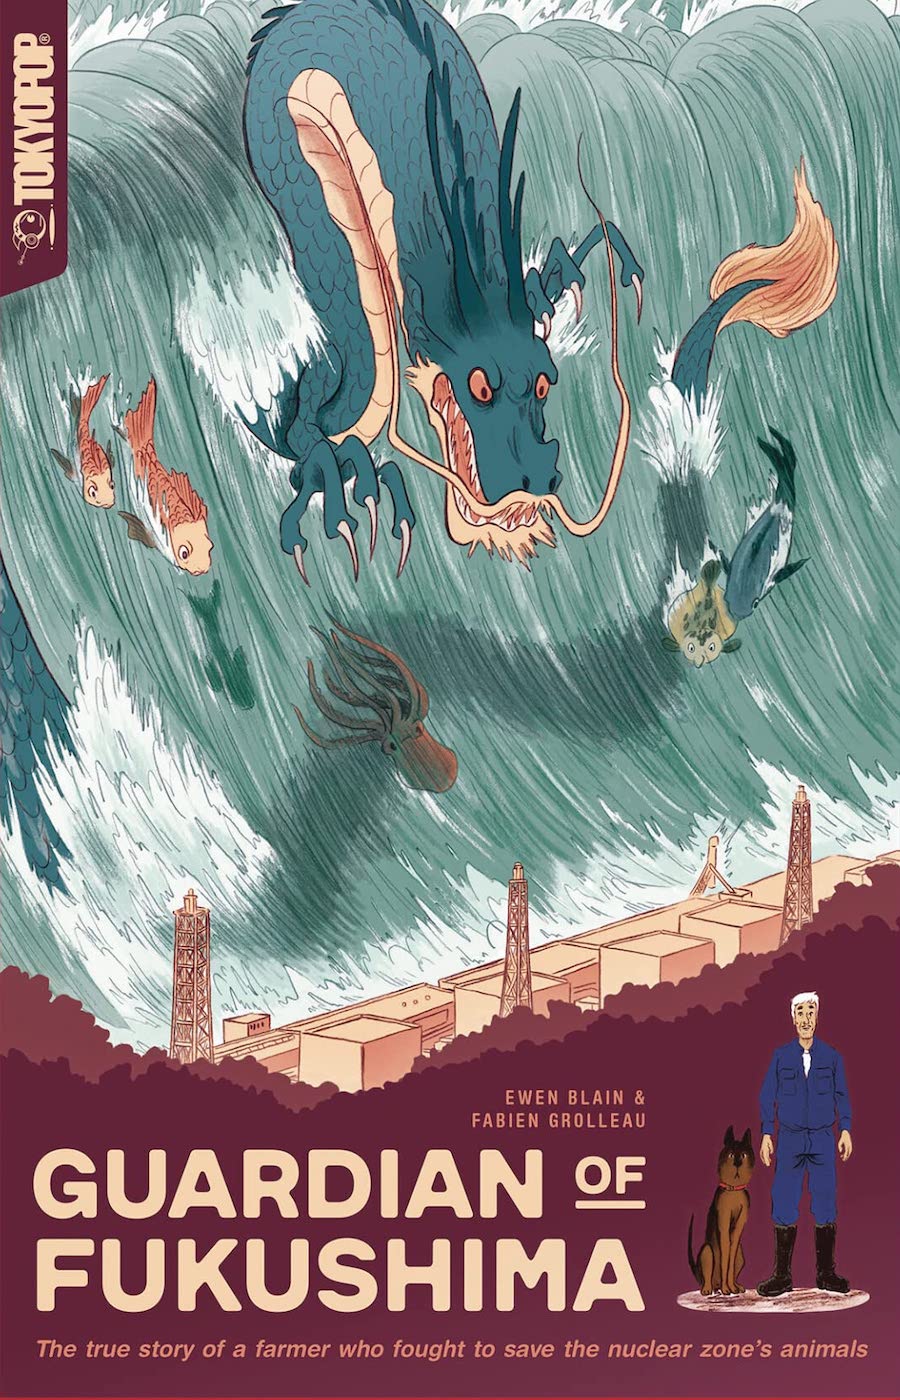 Cover of Guardian of Fukushima, showing a dragon, fish, and other water creatures in a giant wave, with the Fukushima nuclear plant in the middle ground and a man and a dog in the lower right corner.